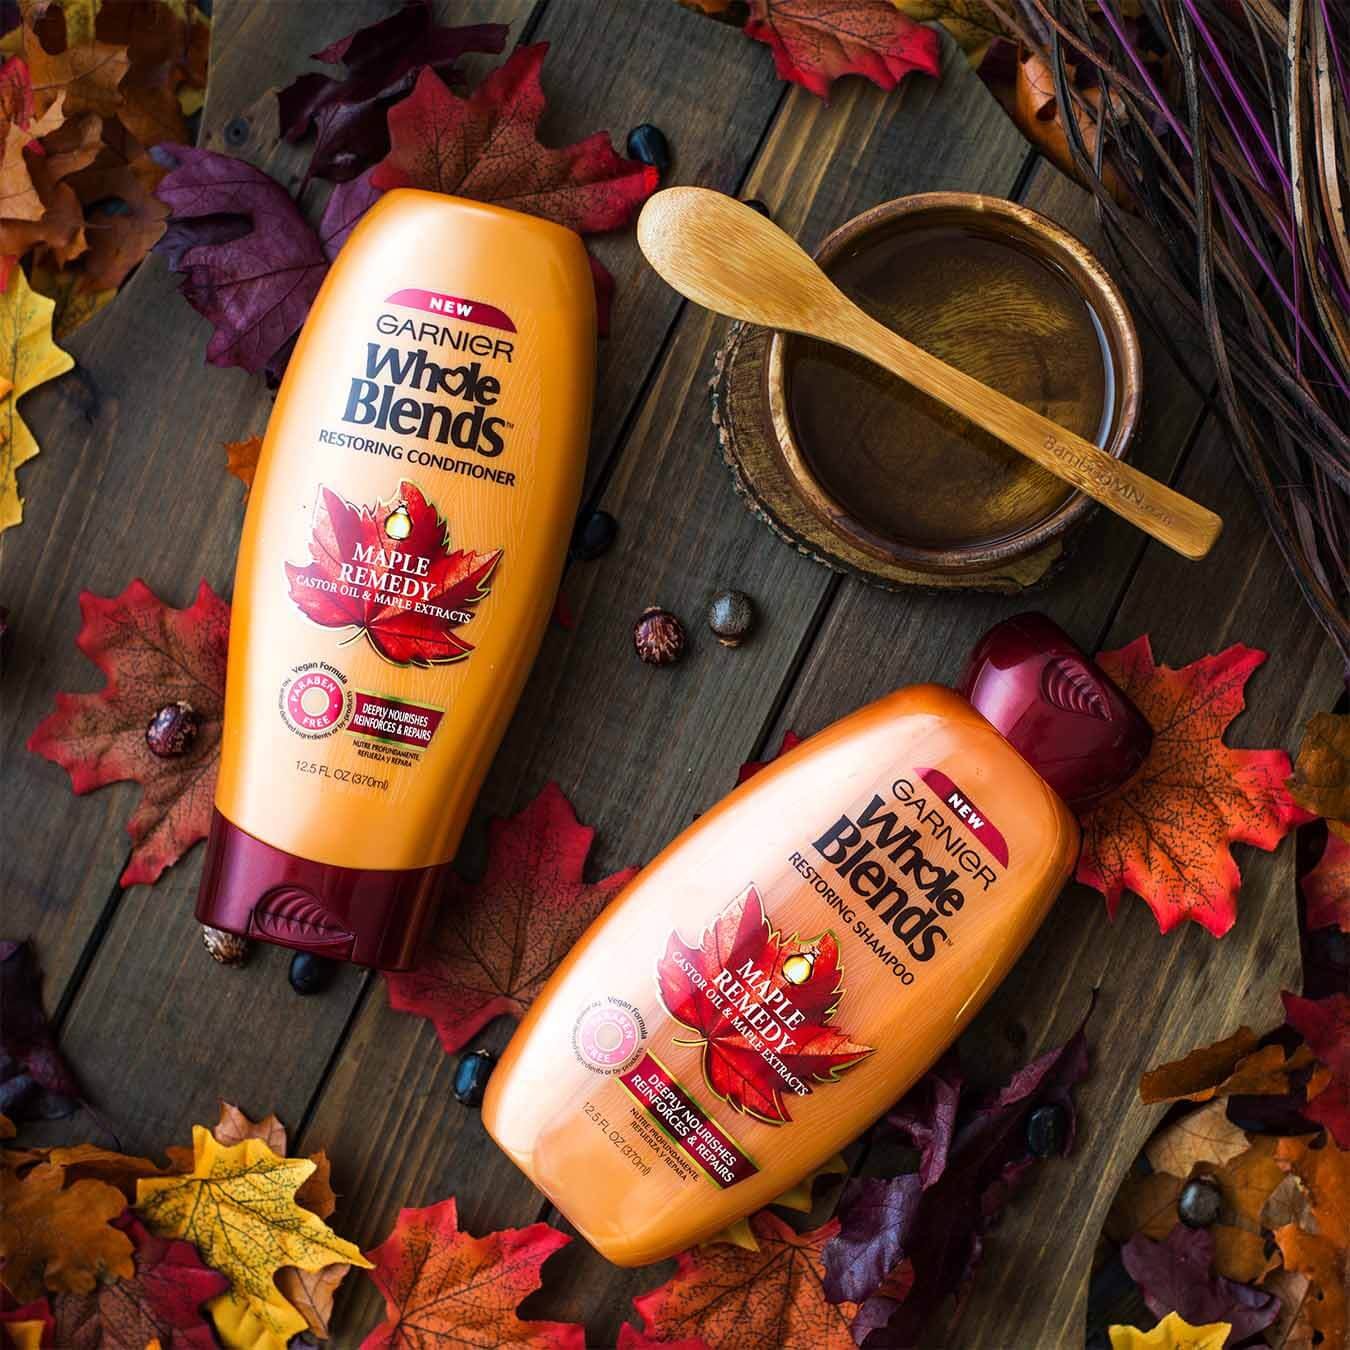 Whole Blends Maple Remedy Shampoo with Caster Oil and Maple Extracts and Maple Remedy Conditioner with Caster Oil and Maple Extracts next to a wooden bowl of maple syrup with a wooden spoon on top beside a woven tangle of branches and purple wires on a wooden table strewn with red, orange, and purple maple leaves and beads.